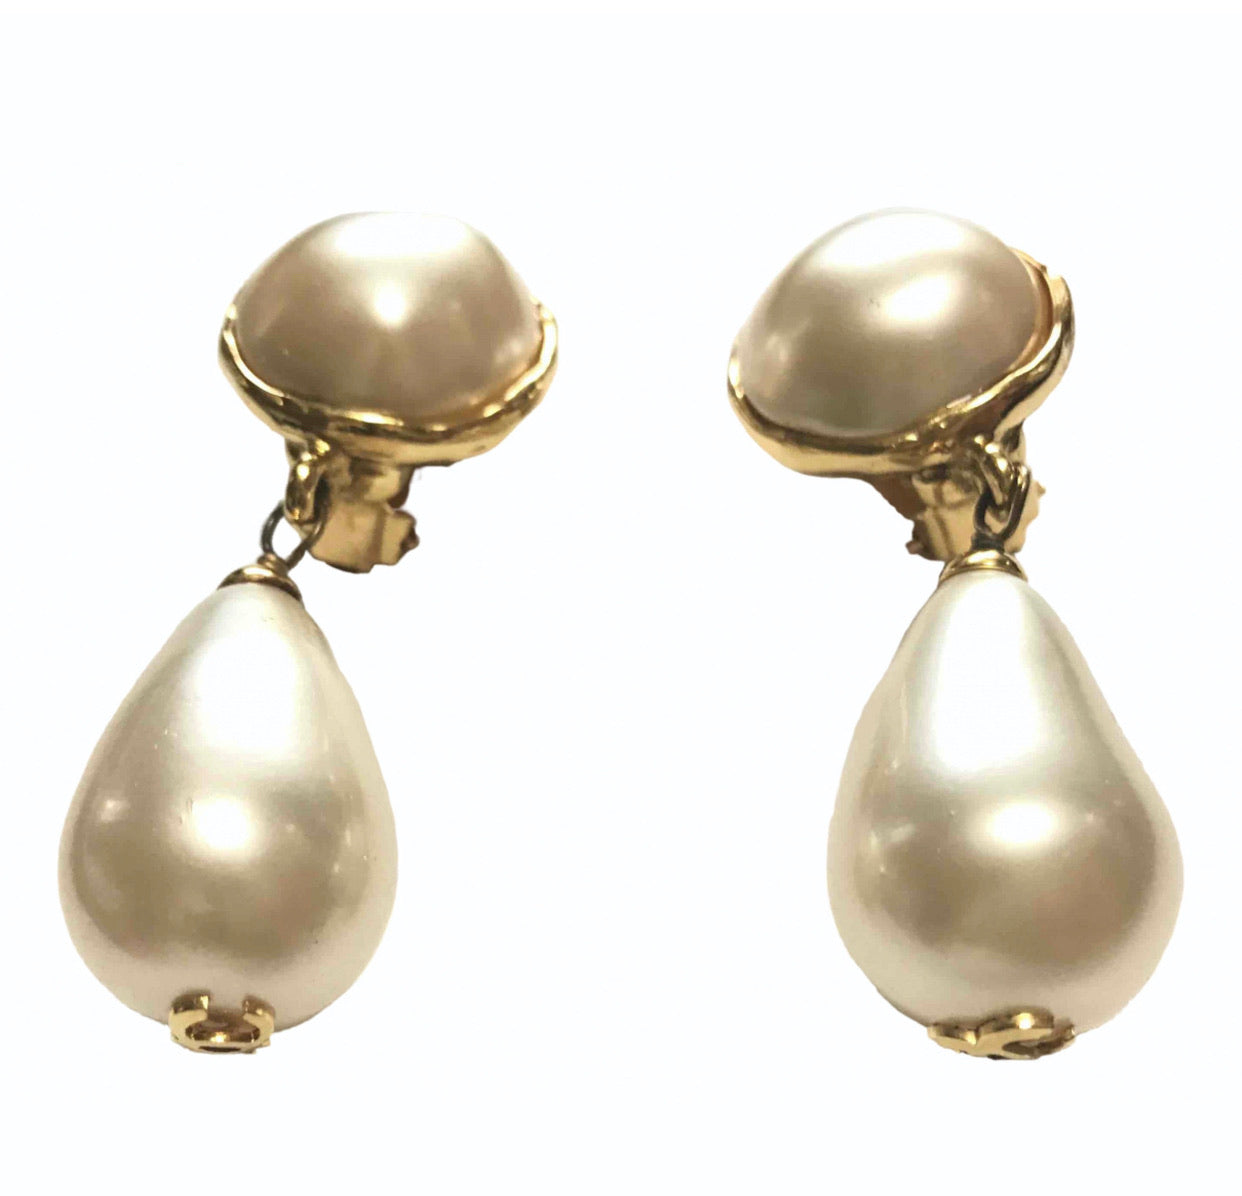 CHANEL, Jewelry, Chanel Crystal Cc Pearl Drop Earrings Auth